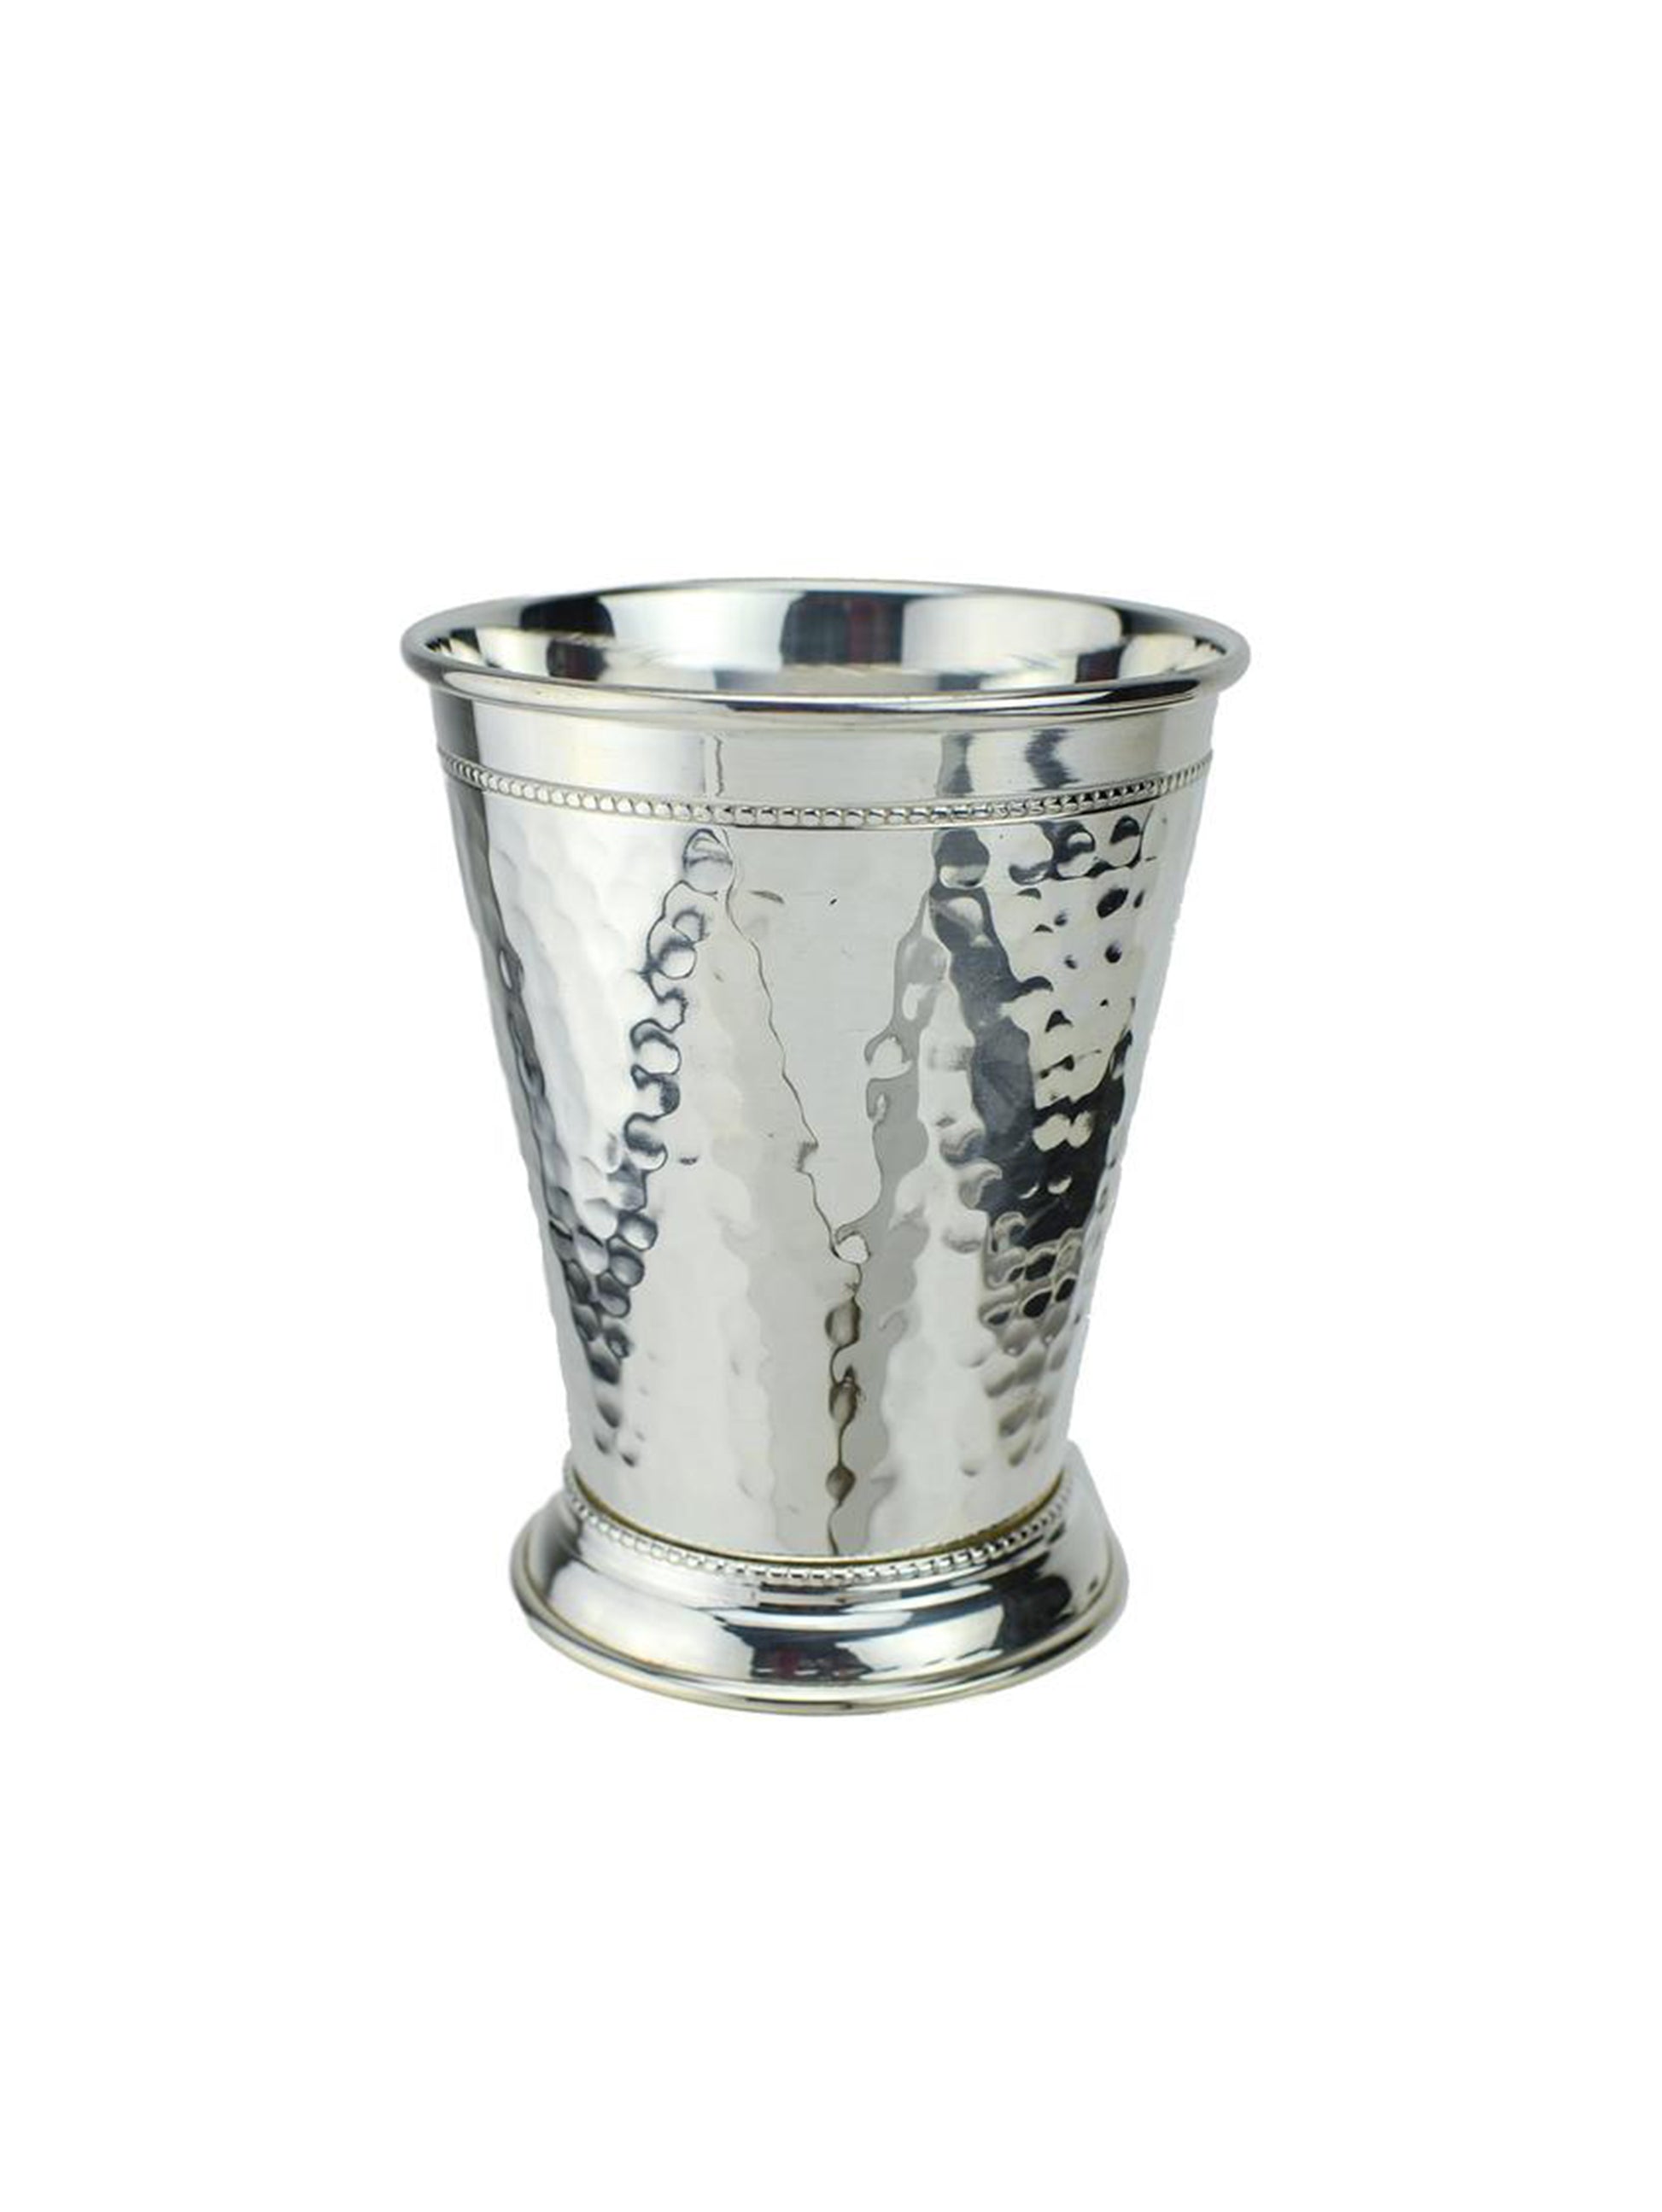 Hammered Copper Mint Julep Cup with Pure Silverplate Weston Table